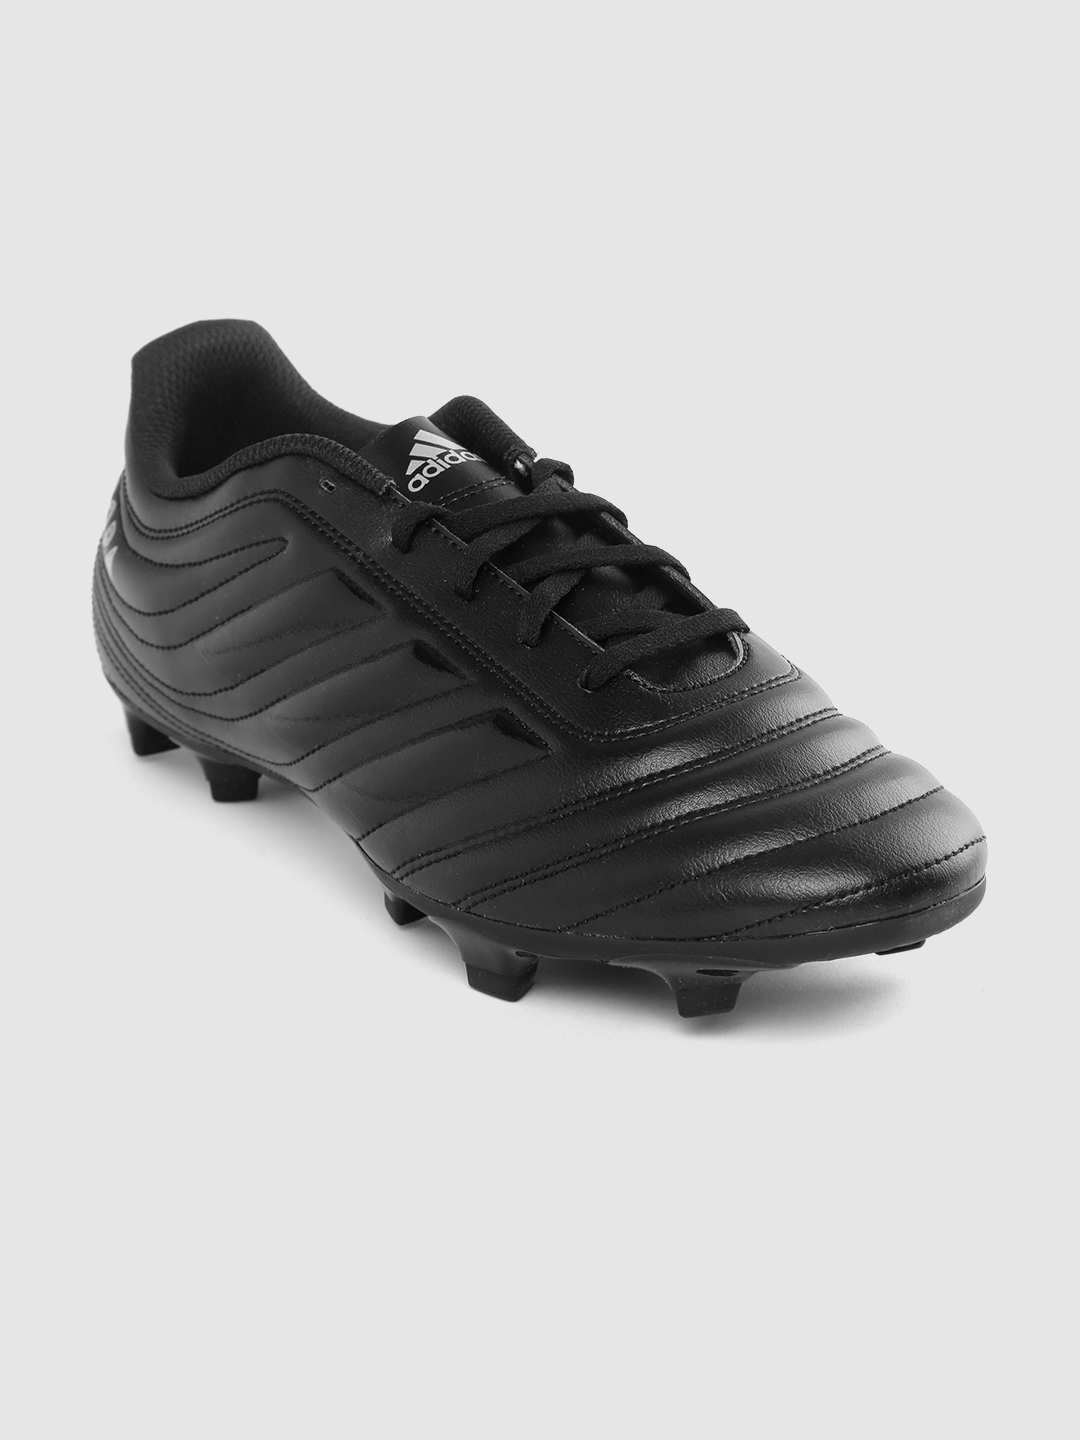 Buy ADIDAS Black COPA 19.4 Firm Ground Football Shoes - Sports Shoes for Men 10395745 |